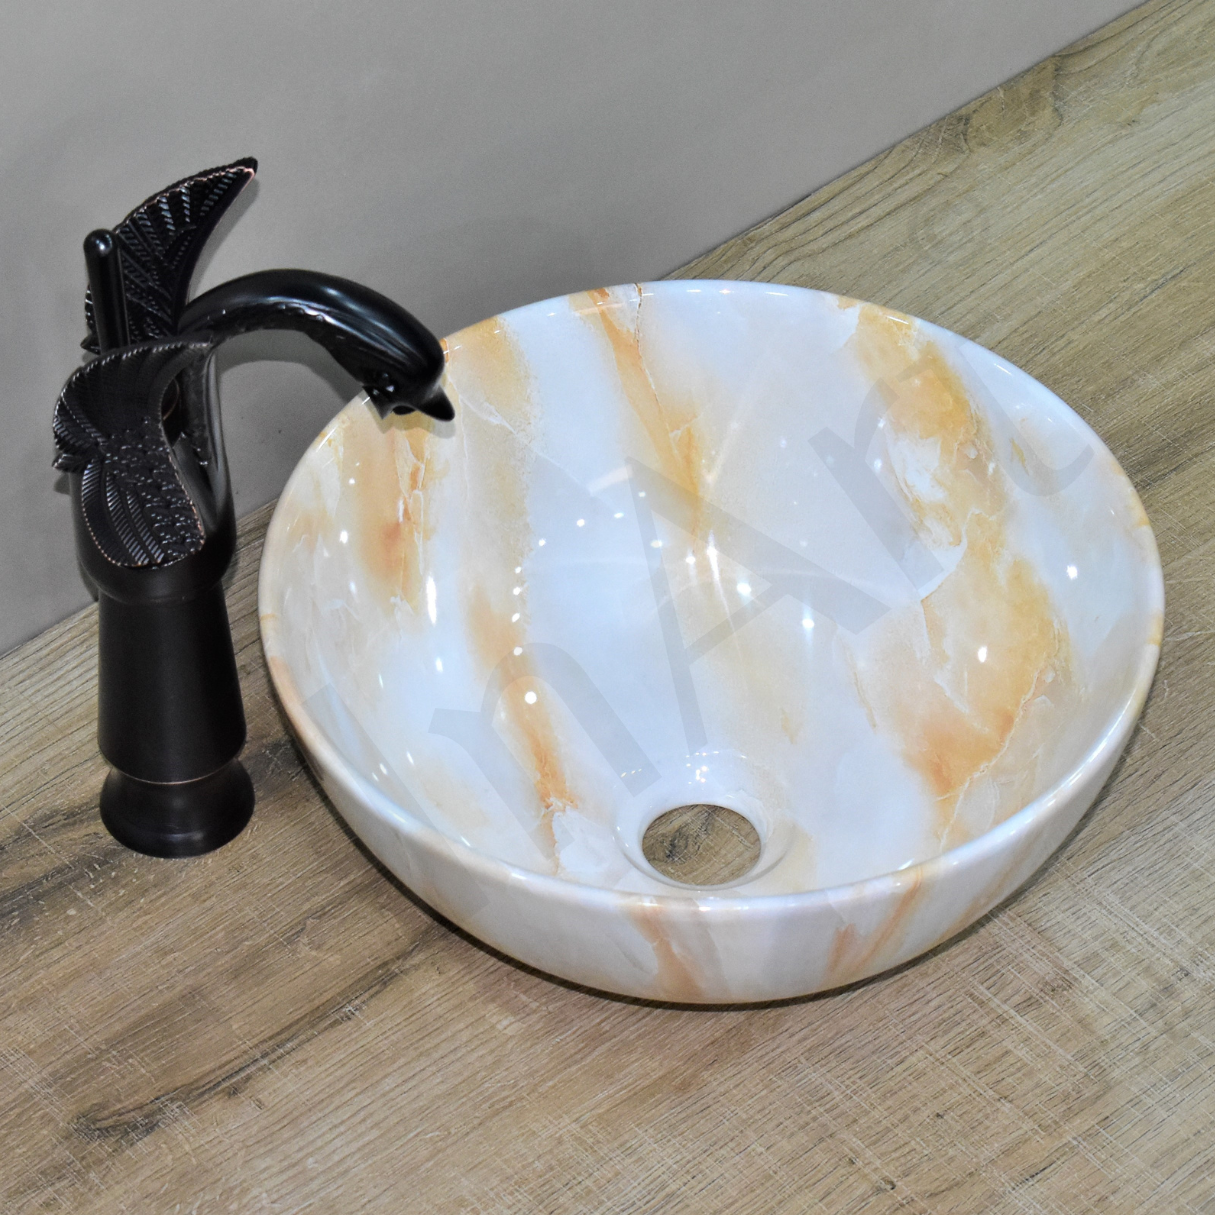 INART Onyx Glossy Ceramic Basin 12x12 Inches - Designer Round Counter Top Wash Basin Sink for Bathroom & Living Room - InArt-Studio